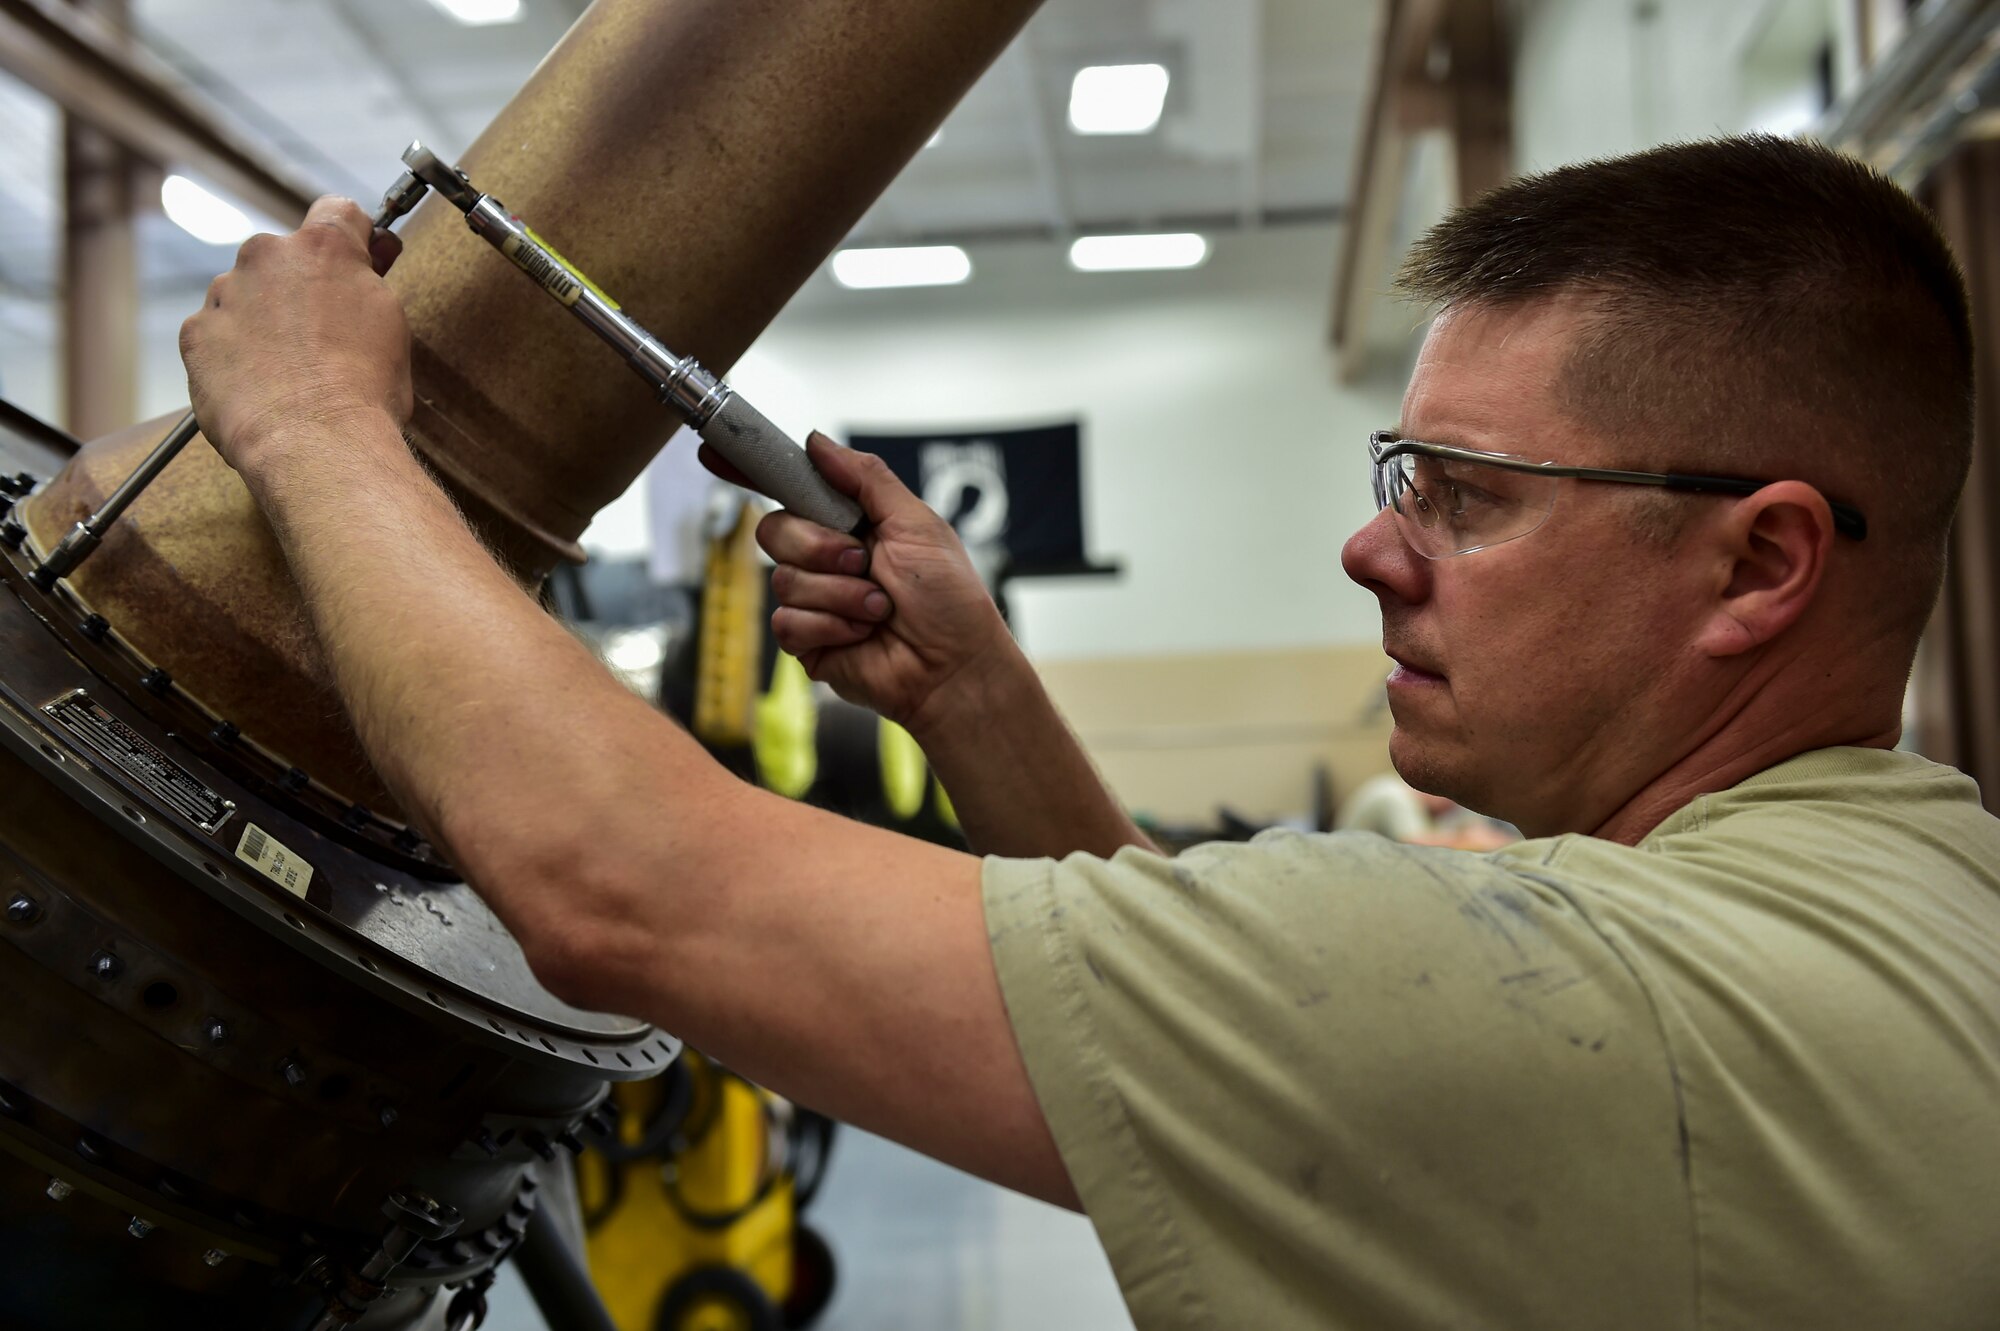 Tech. Sgt. Steve Lew, an aerospace propulsion craftsman with the 910th Maintenance Squadron here, rebuilds a C-130H Hercules aircraft engine turbine, July 6, 2017. Due to the extreme heat made by the turbine, components eventually wear down and are replaced when found during periodic inspections. (U.S. Air Force Photo/Senior Airman Jeffrey Grossi)